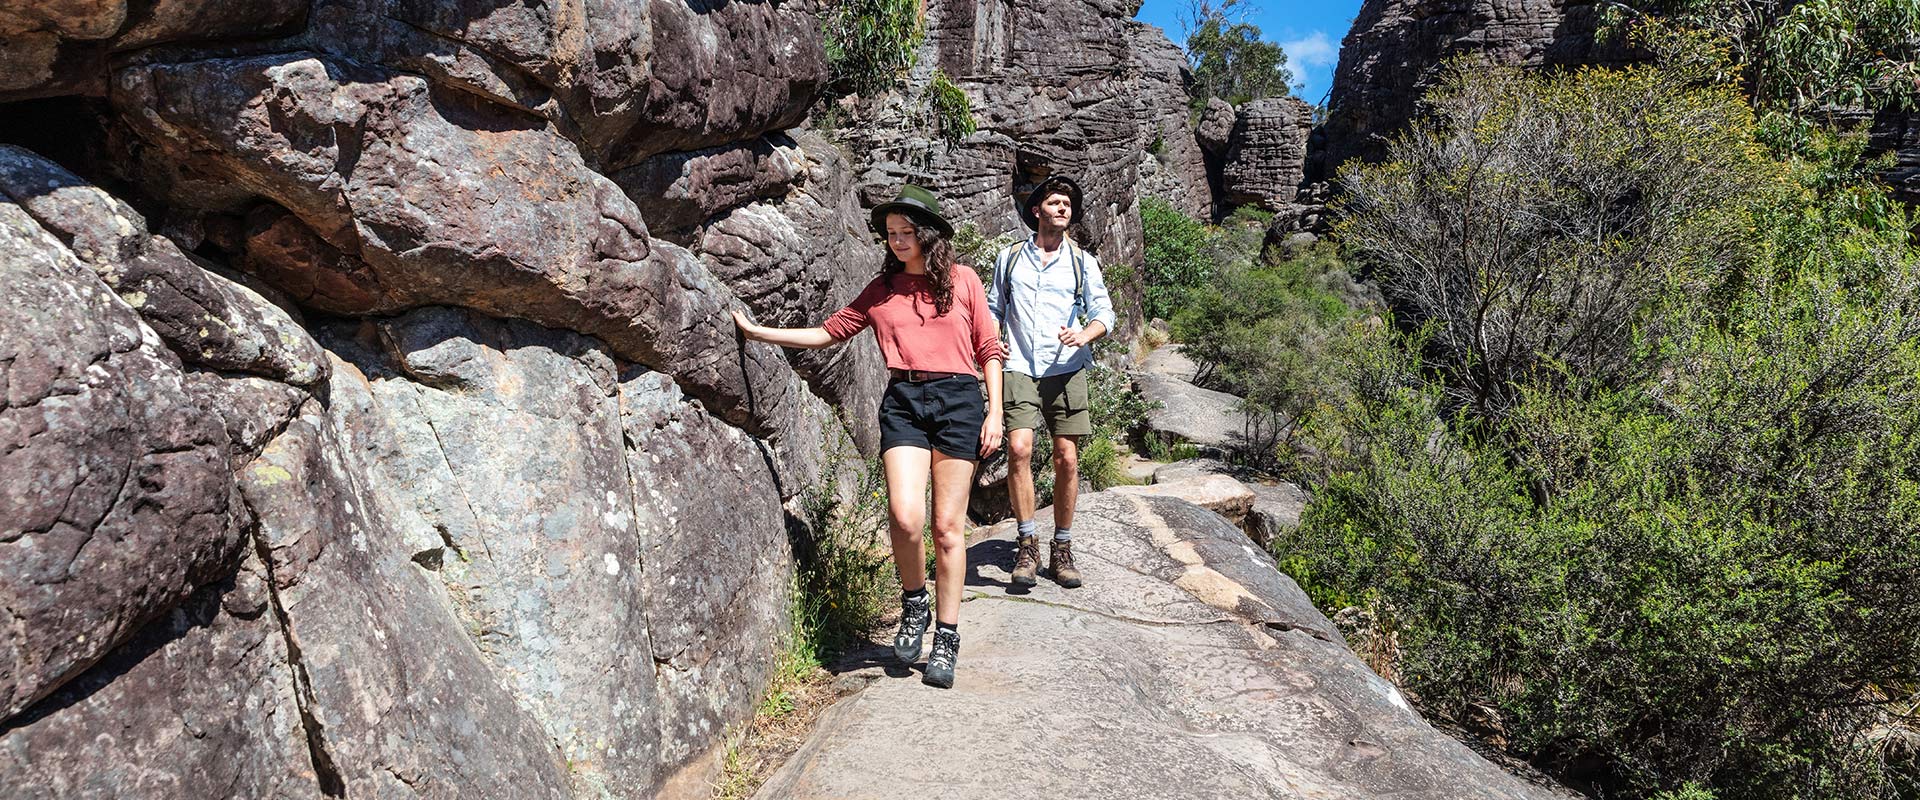 Two hikers walk along a rocky canyon